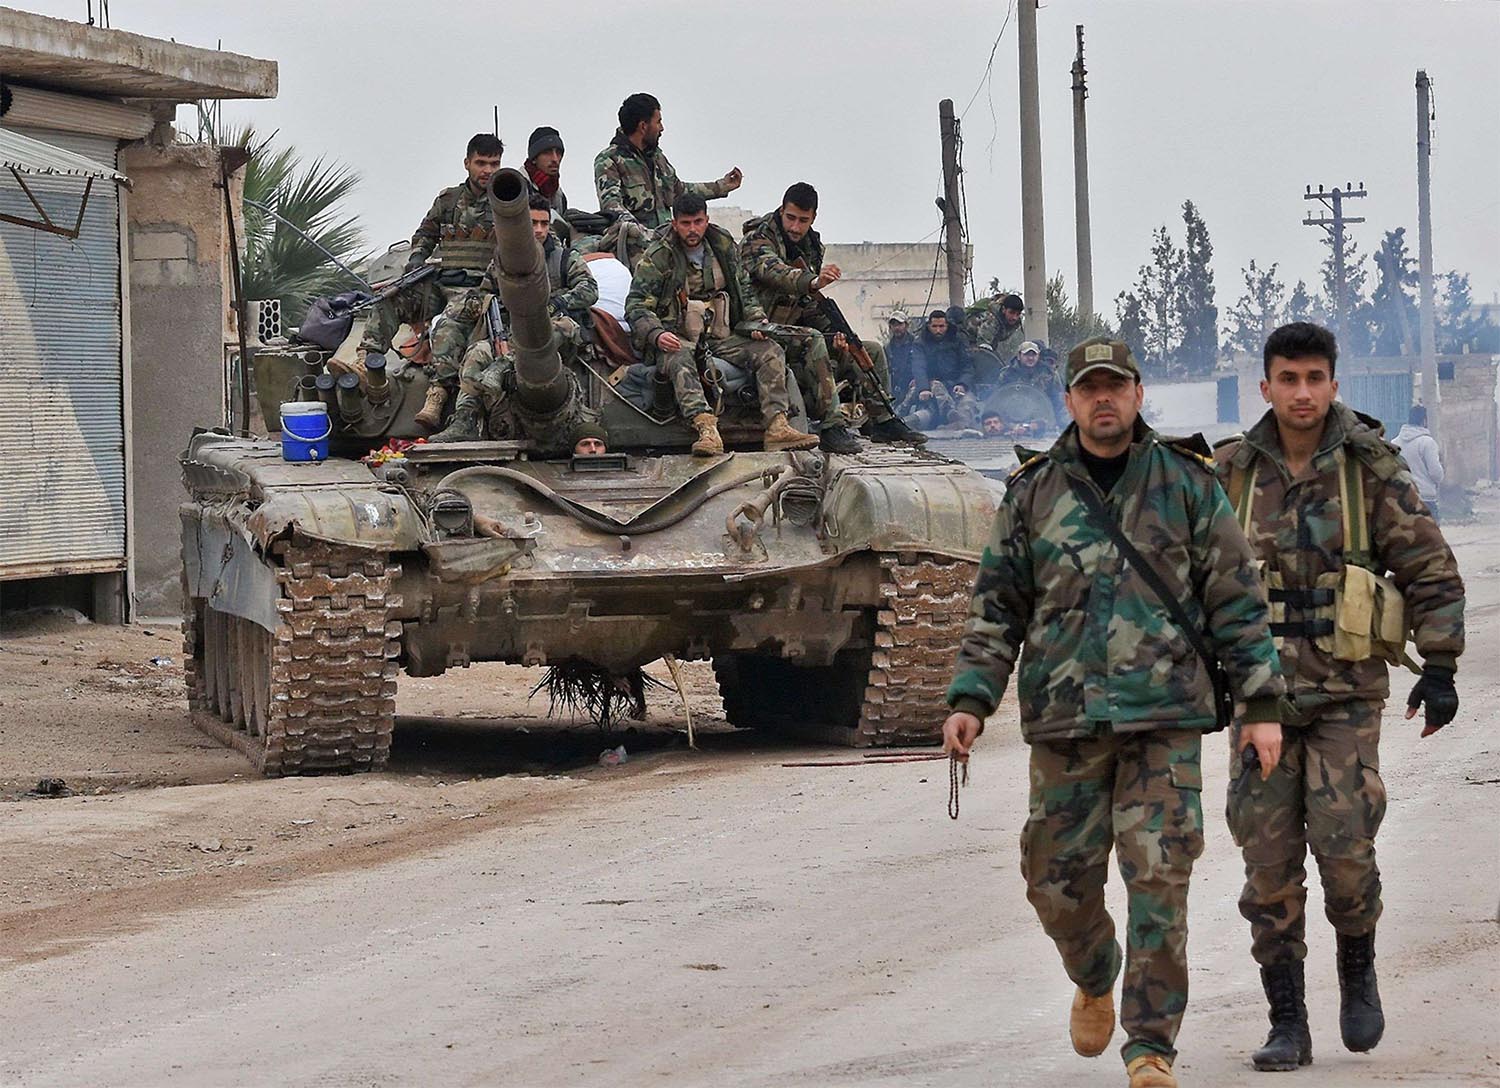 Syrian regime forces press on with their offensive in the northwest